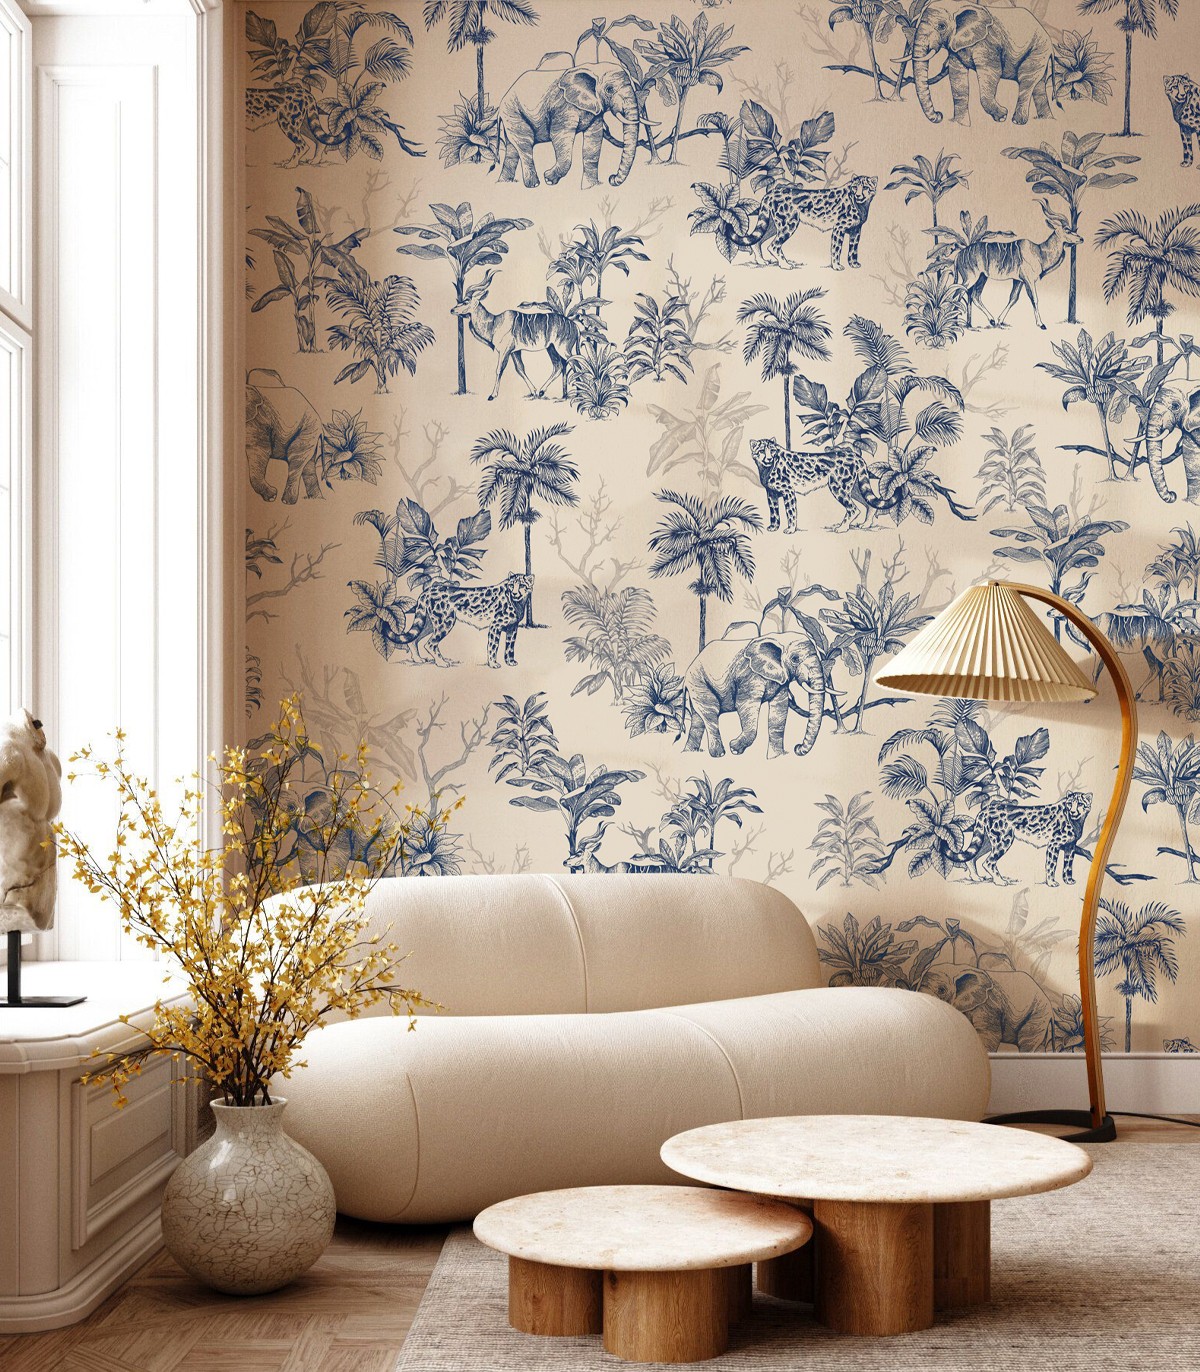 Fashionable and Exclusive Wall Wallpaper • Elegant, Luxurious, Room Design  - Online Shop Wallcolors